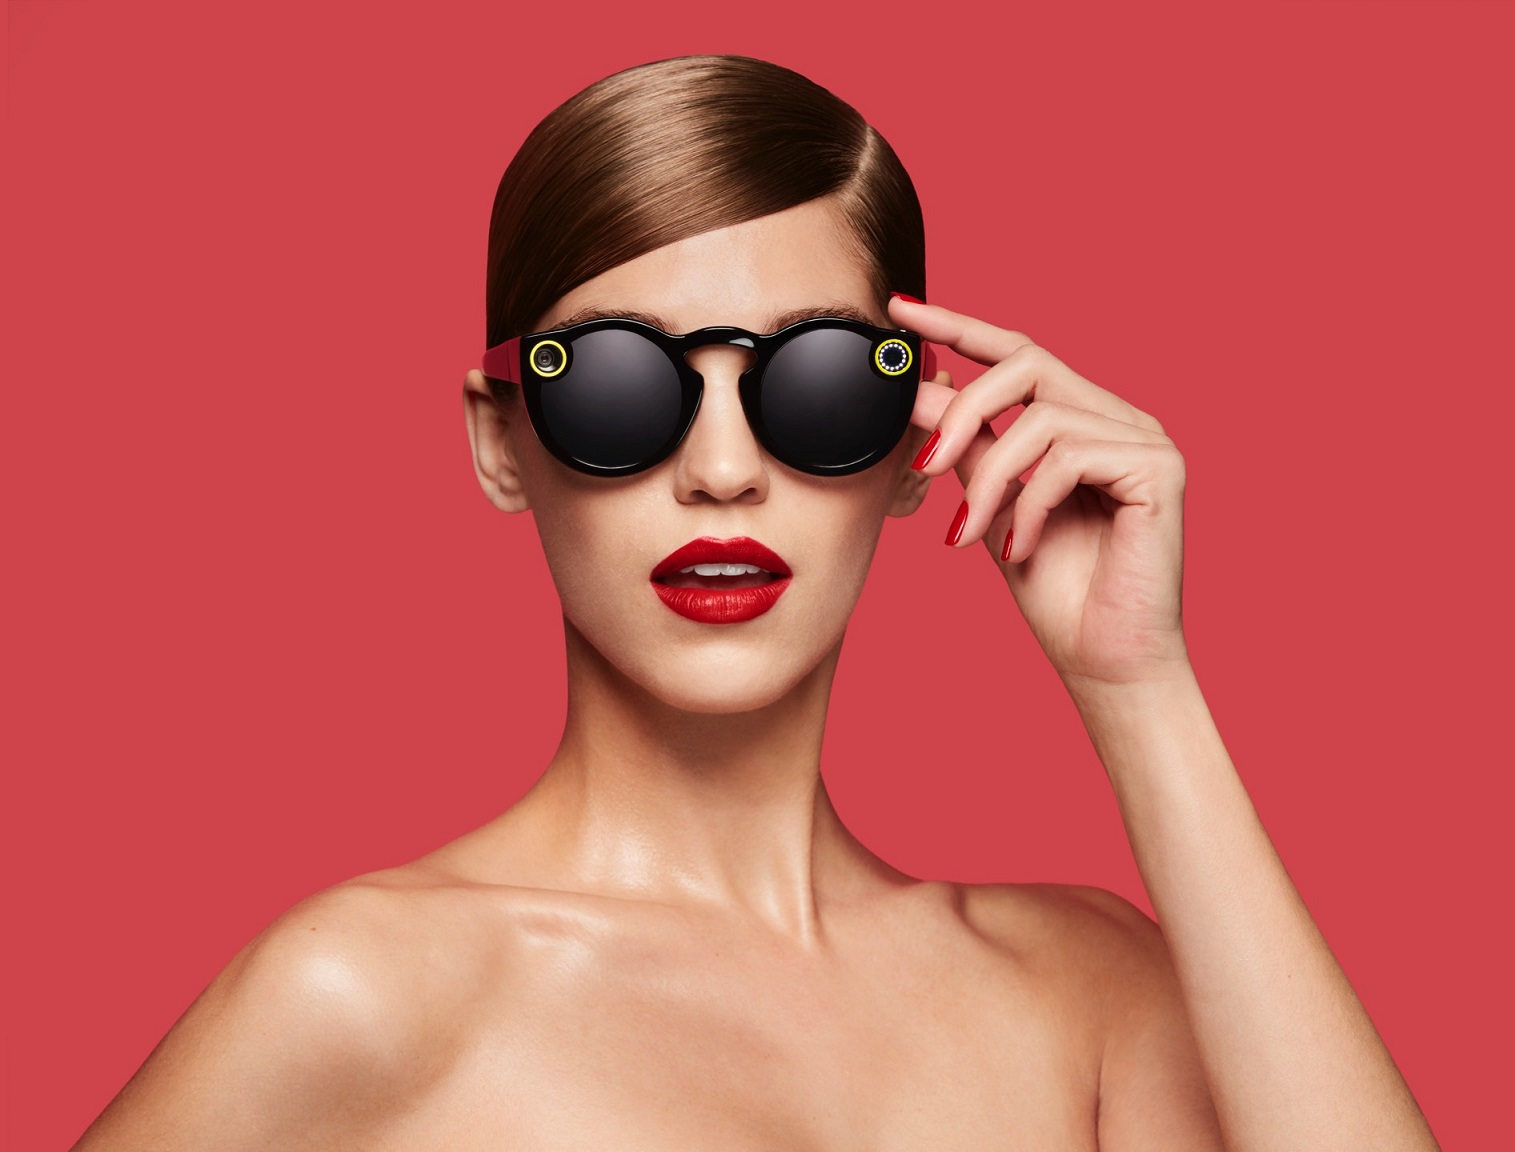 Snap Unveils Spectacles for Easy First Person Snapchatting